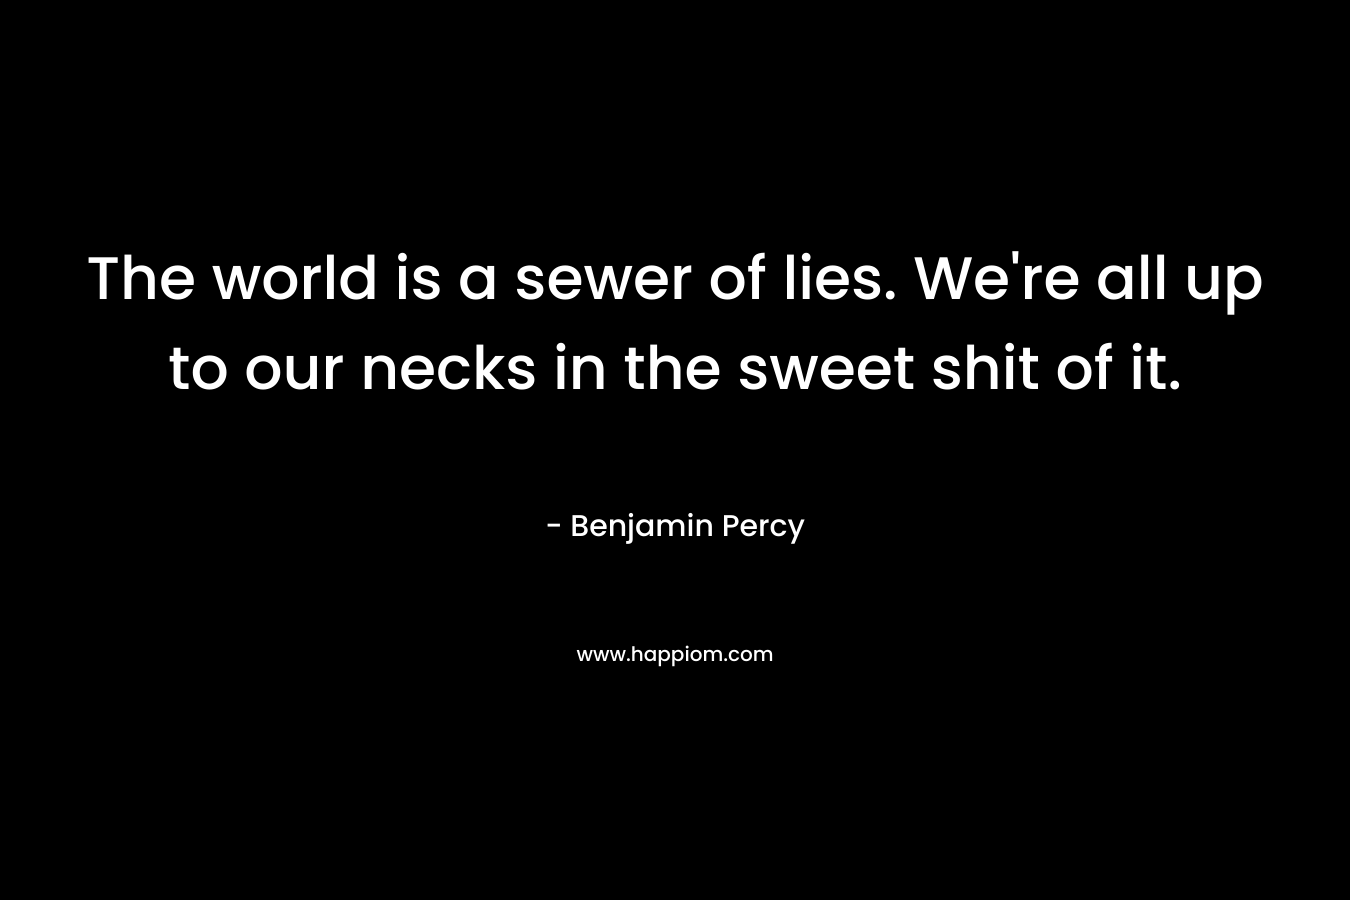 The world is a sewer of lies. We’re all up to our necks in the sweet shit of it. – Benjamin Percy